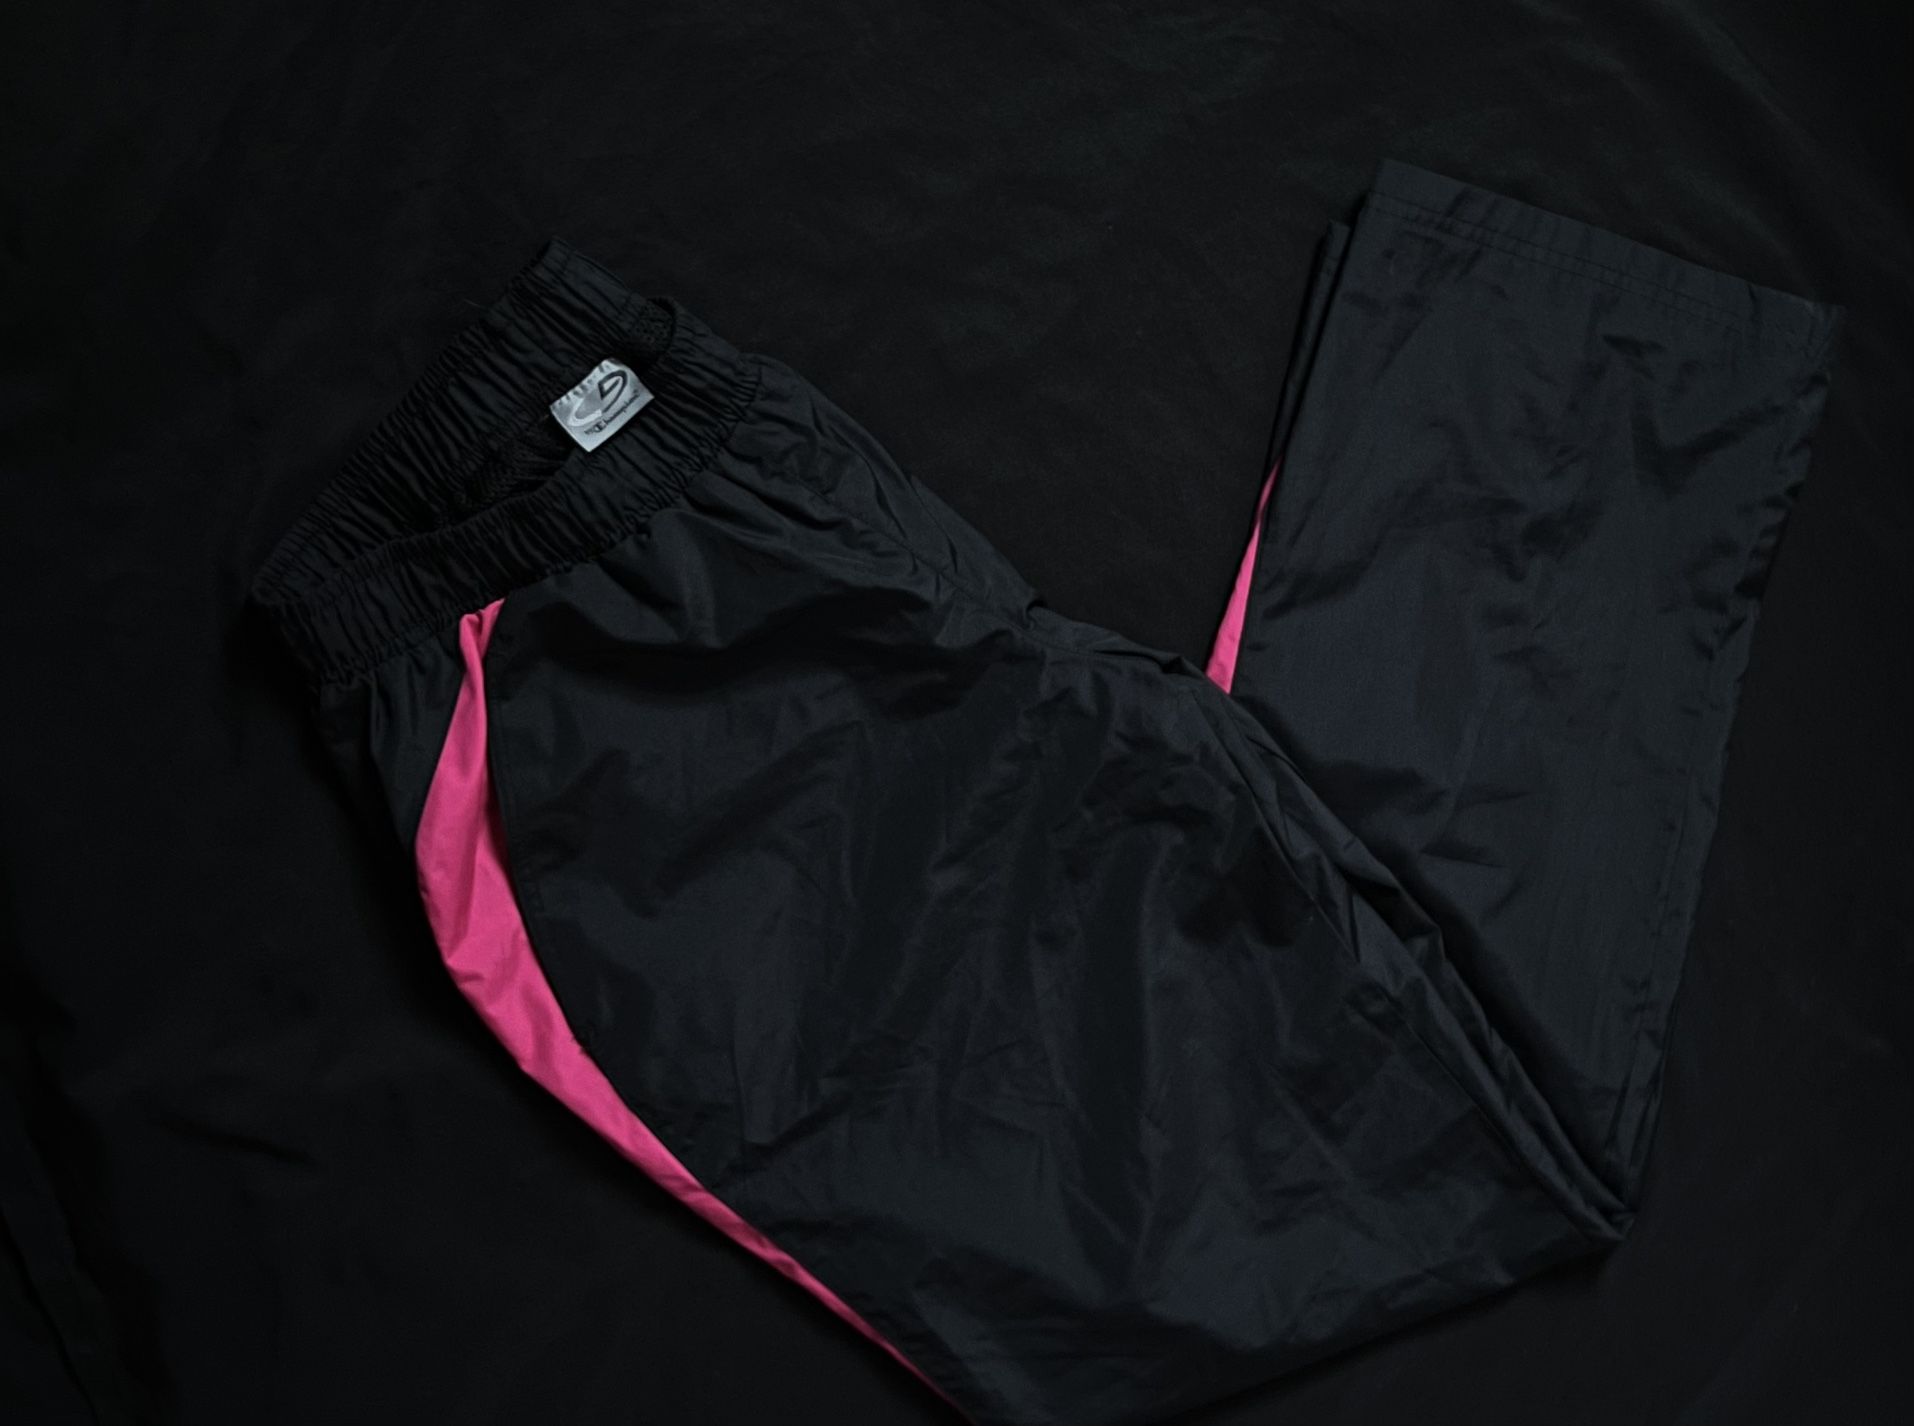 Y2K baggy champion black and pink nylon track pants 